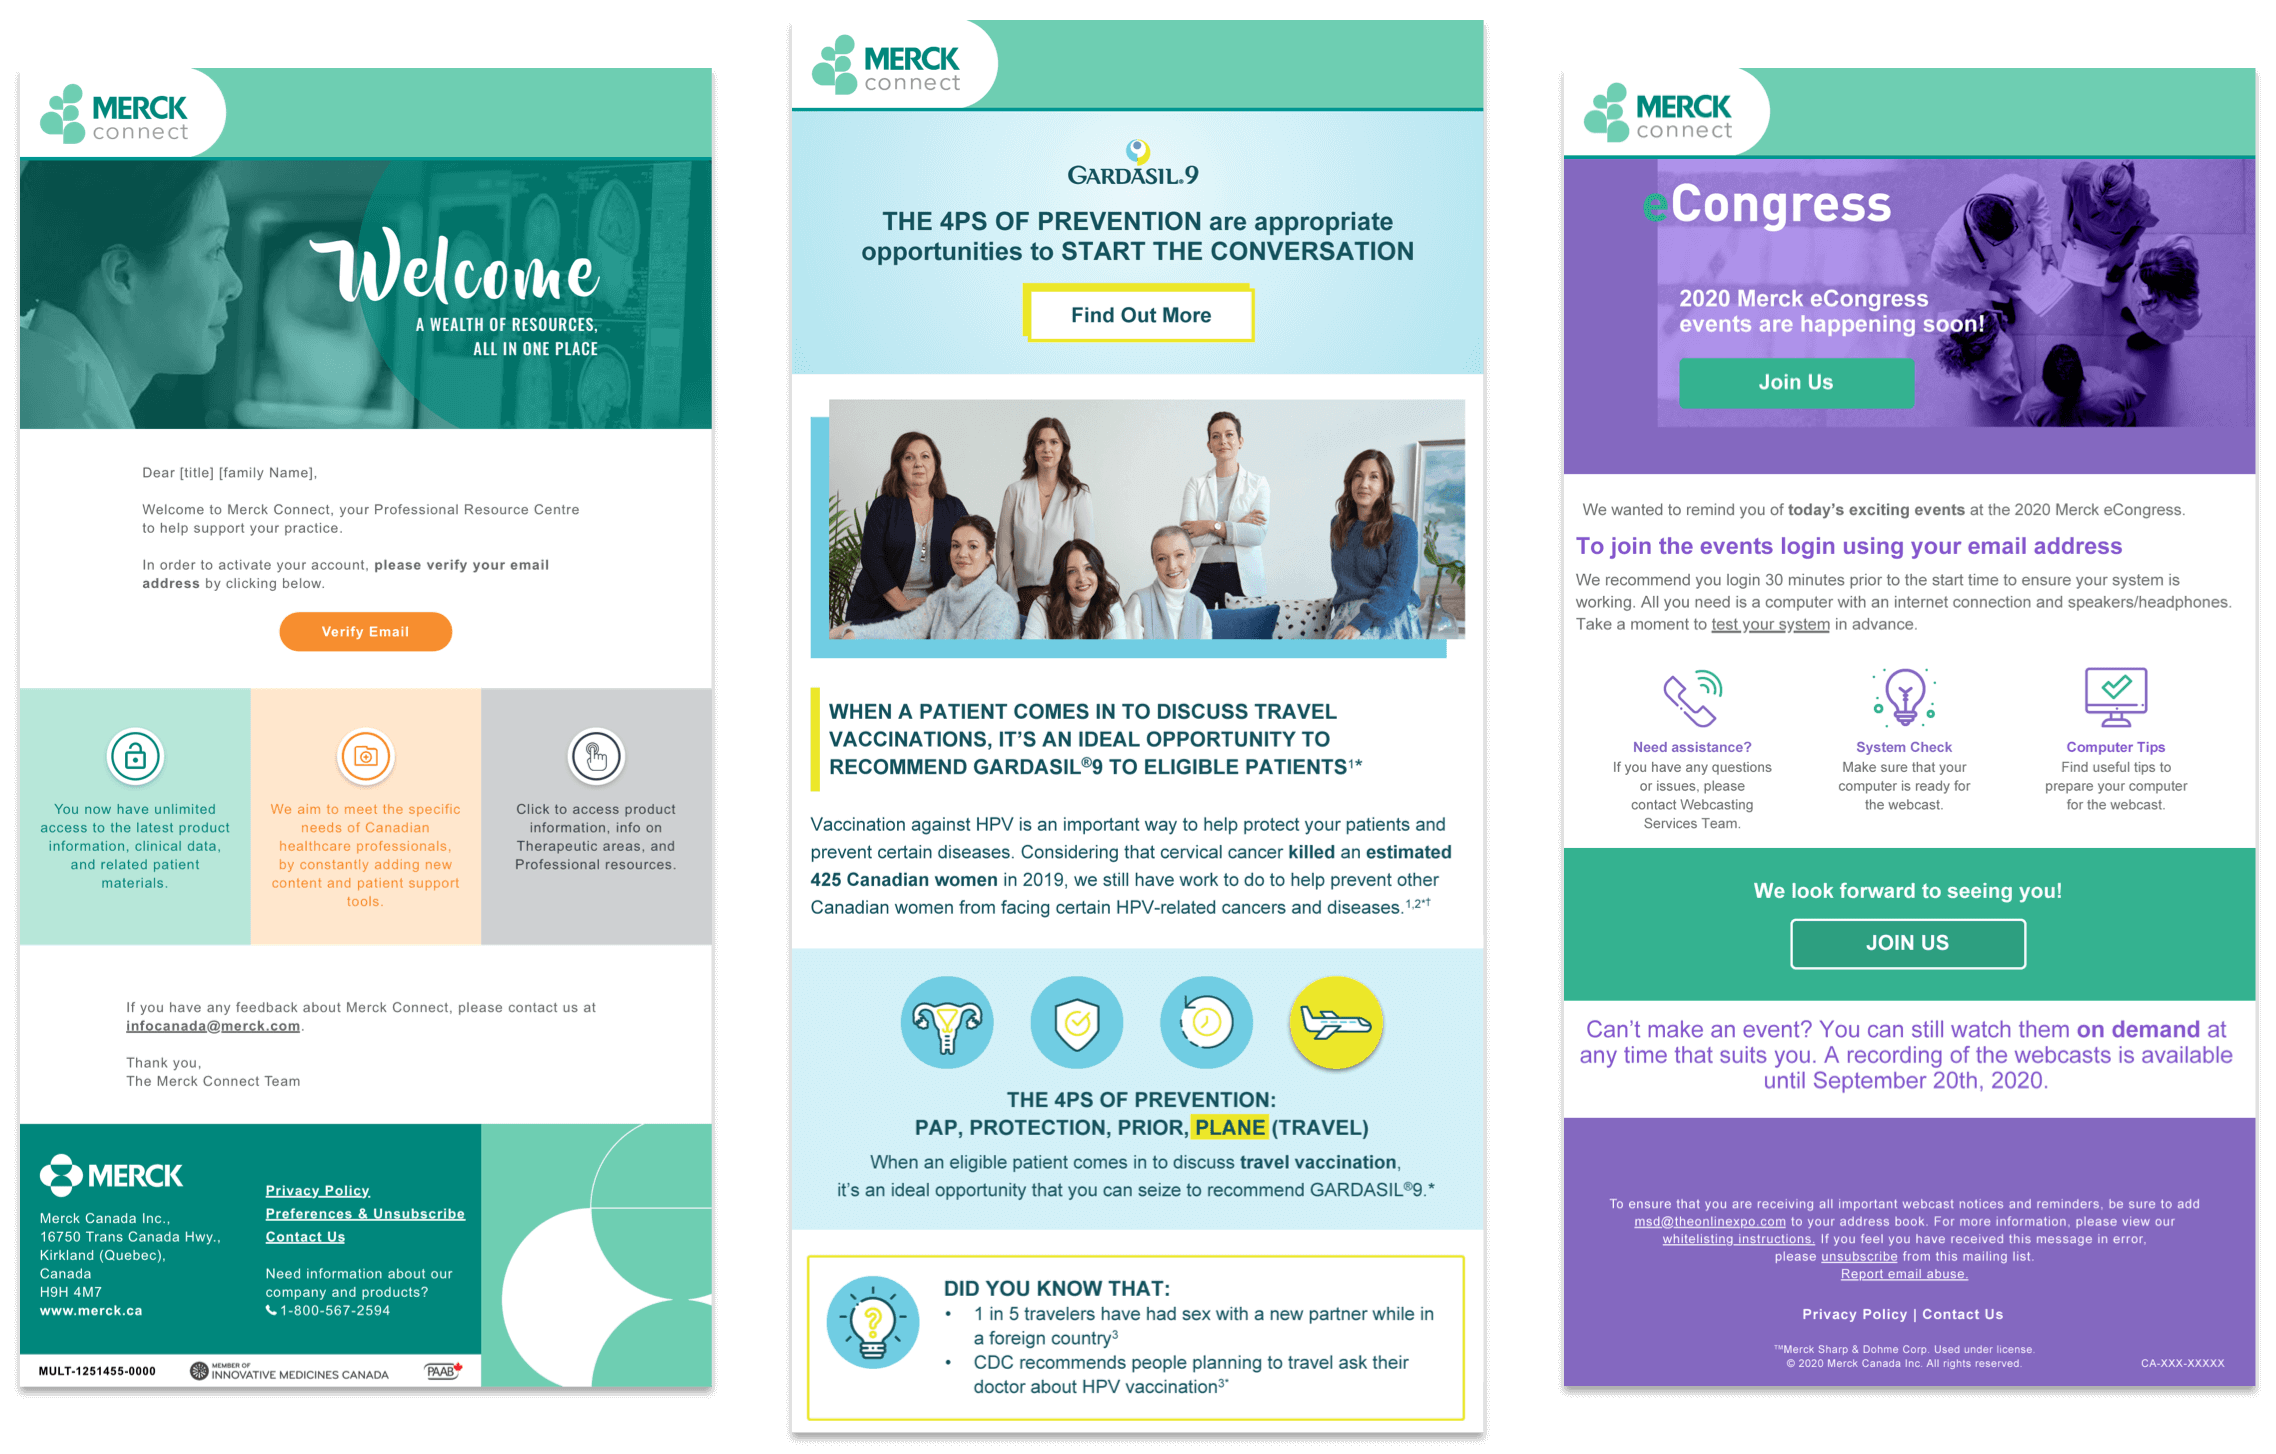 Merck Connect emails